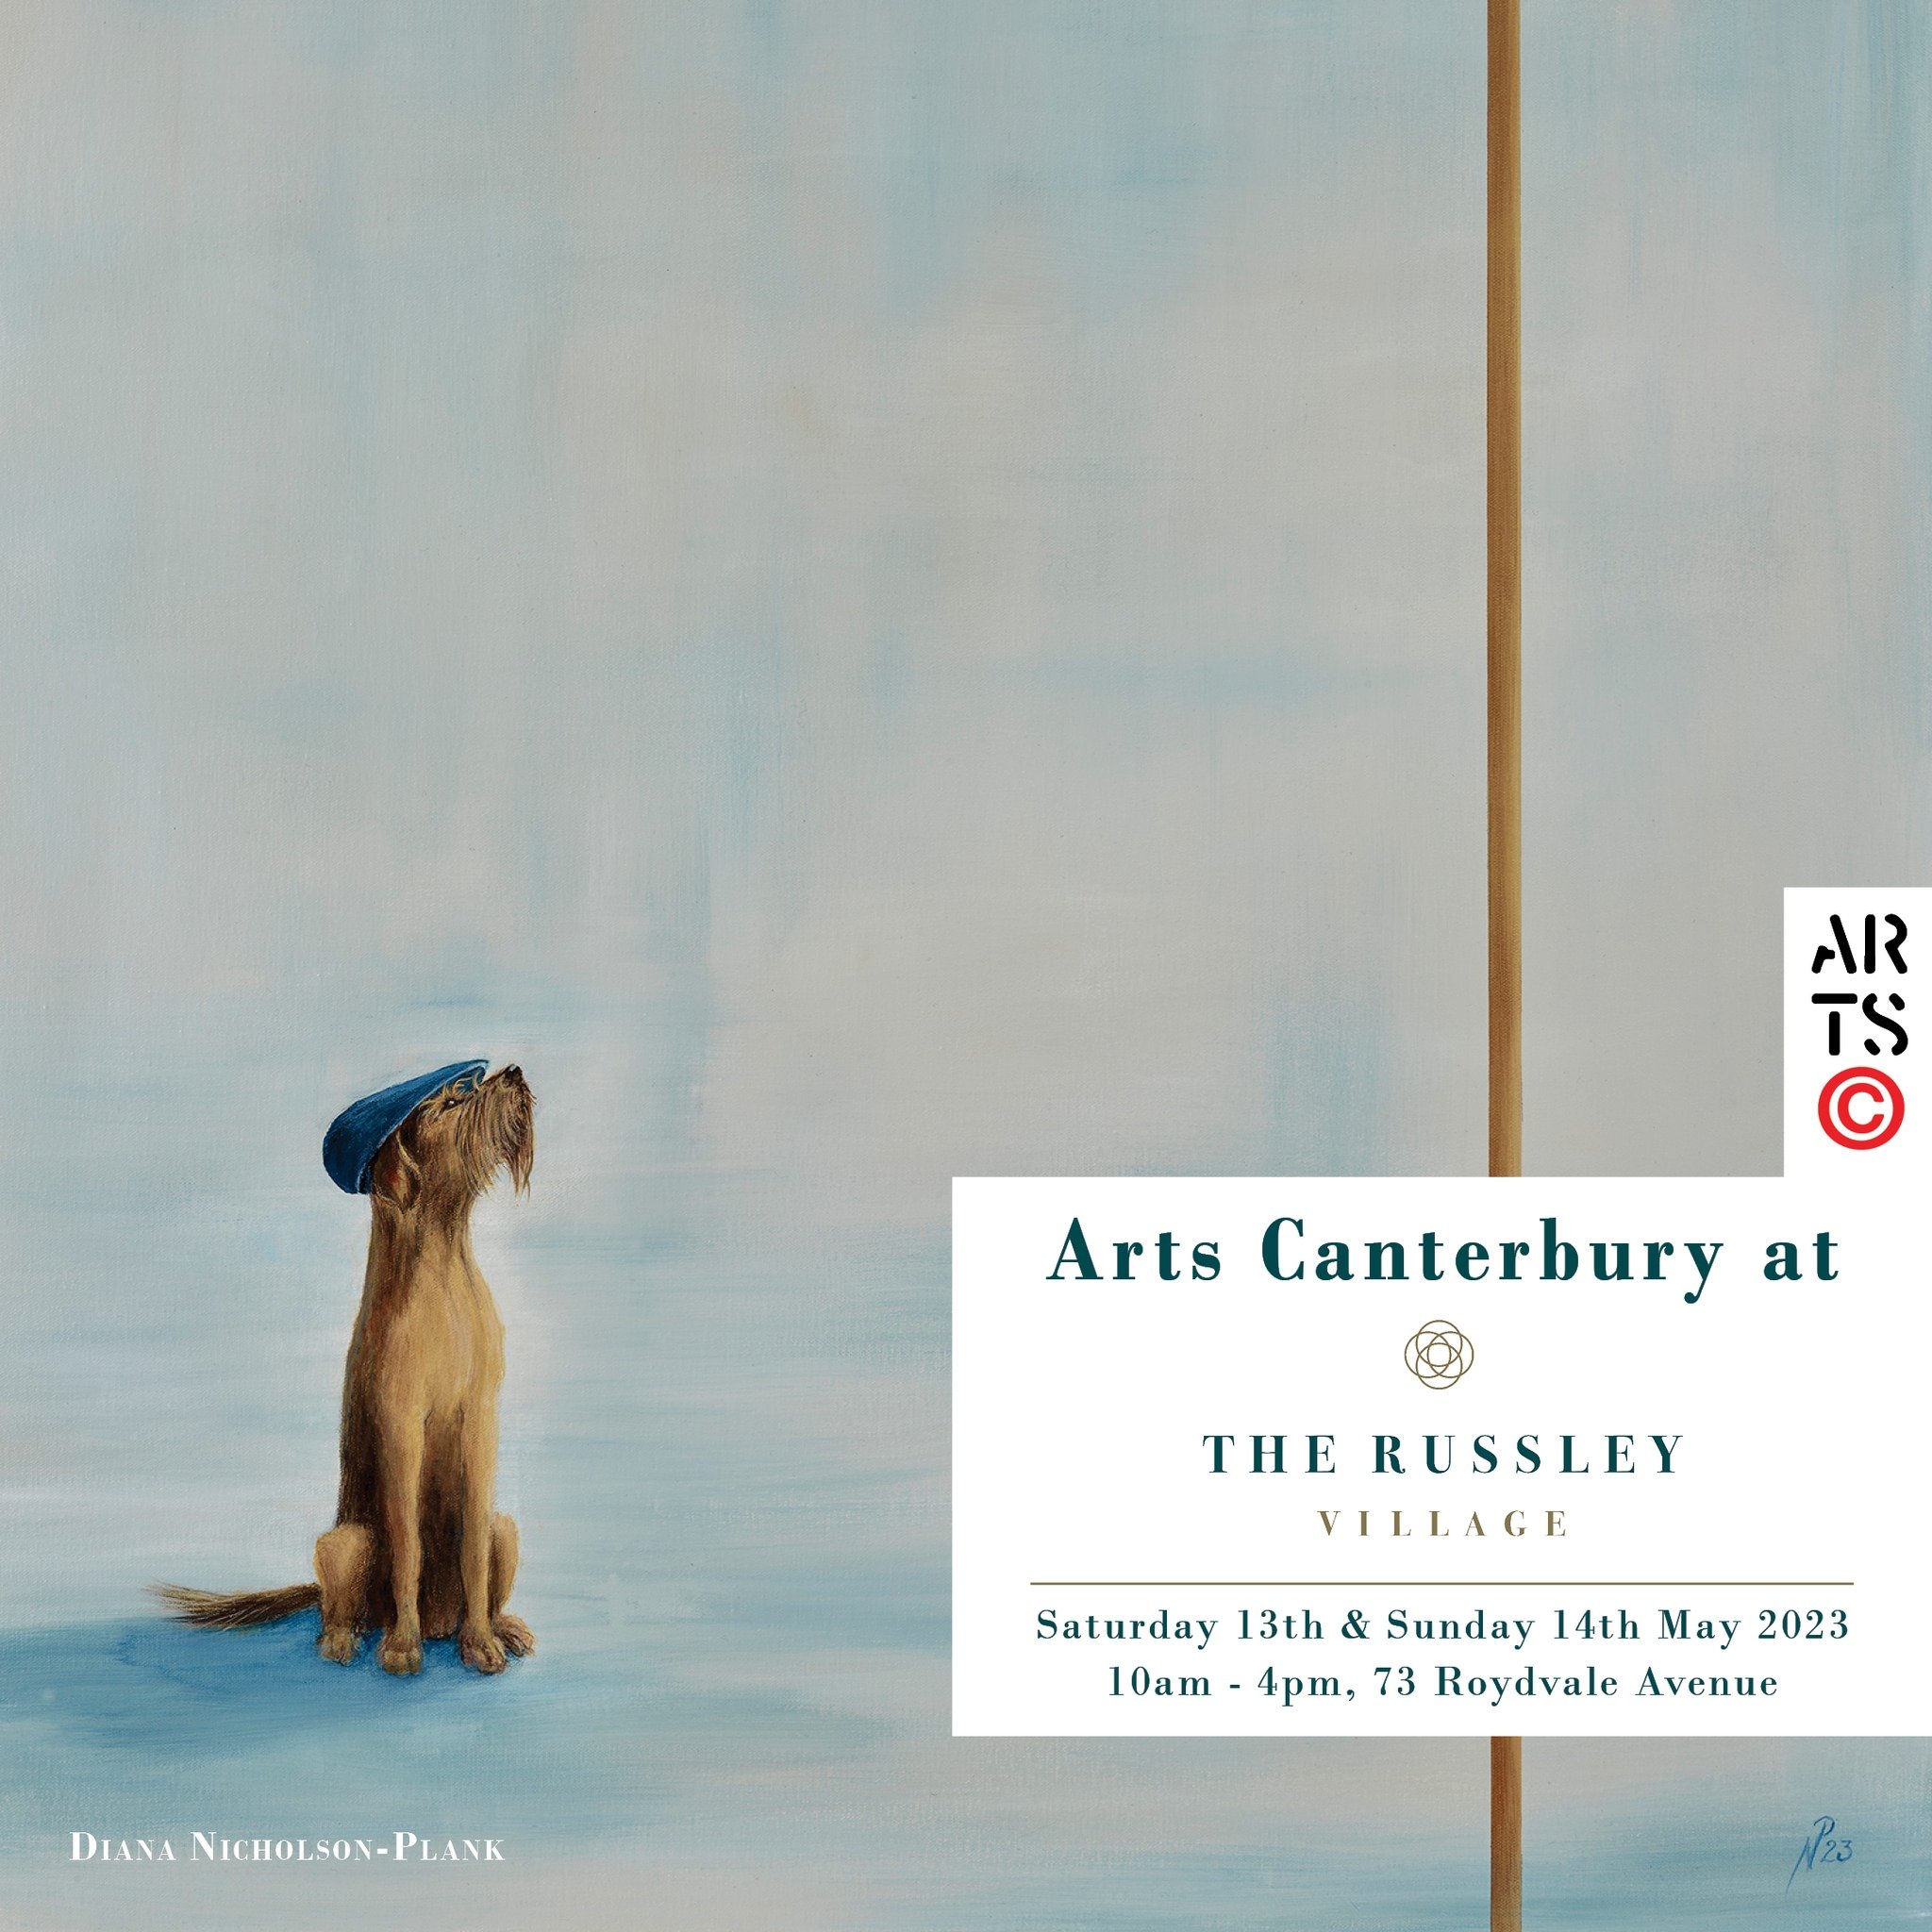 Looking forward to the Arts Canterbury group show at Russley village, 73 Roydvale Ave this weekend (13-14 May). 
This is always a great event with lots of varied art to see and lots of fabulous Artists to chat with.
Hope to see you there...
Say hi if